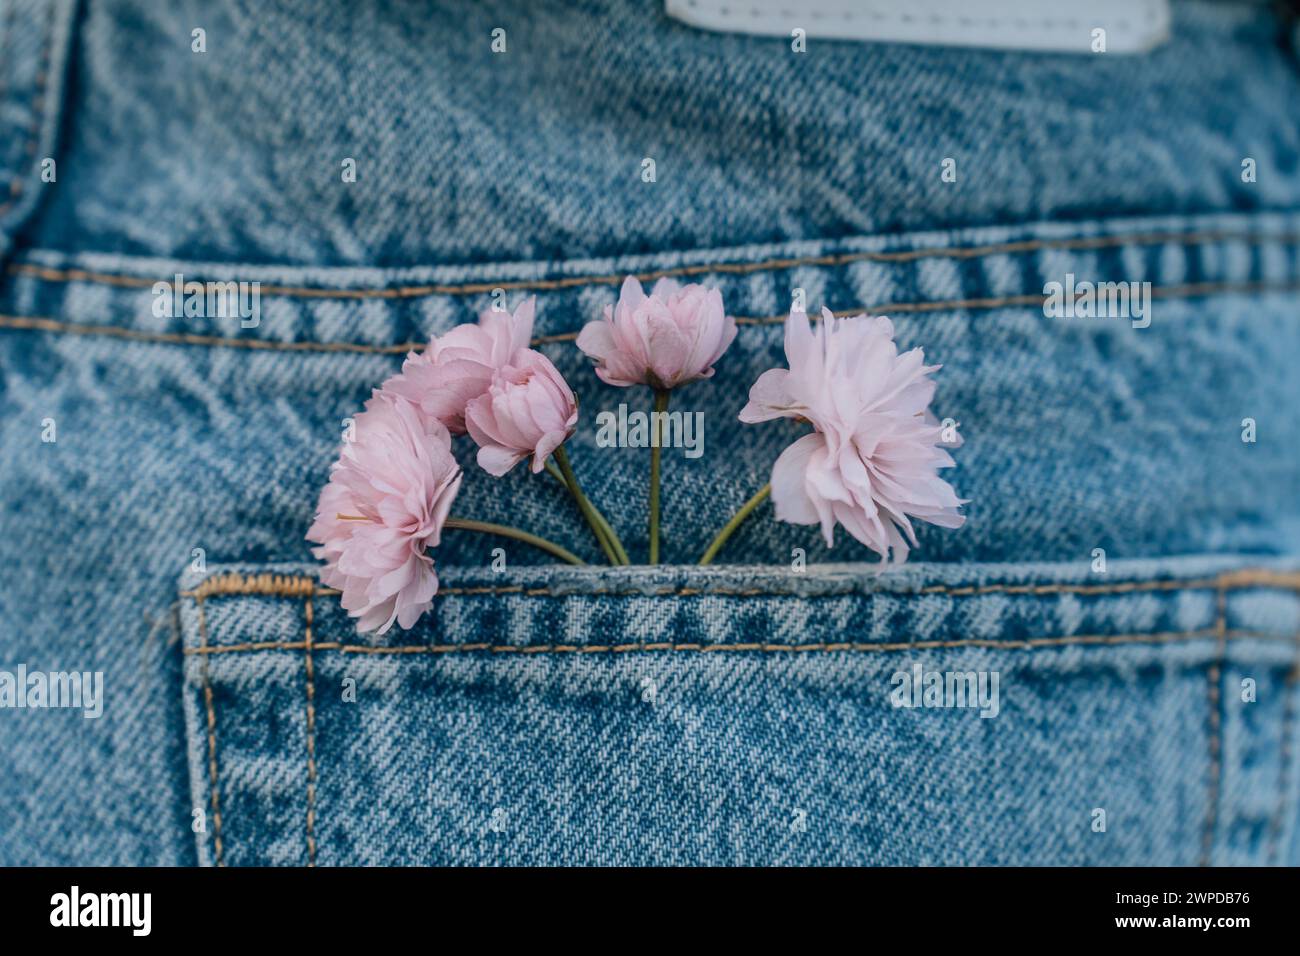 pink flowers in the pocket of blue jeans, close-up Stock Photo